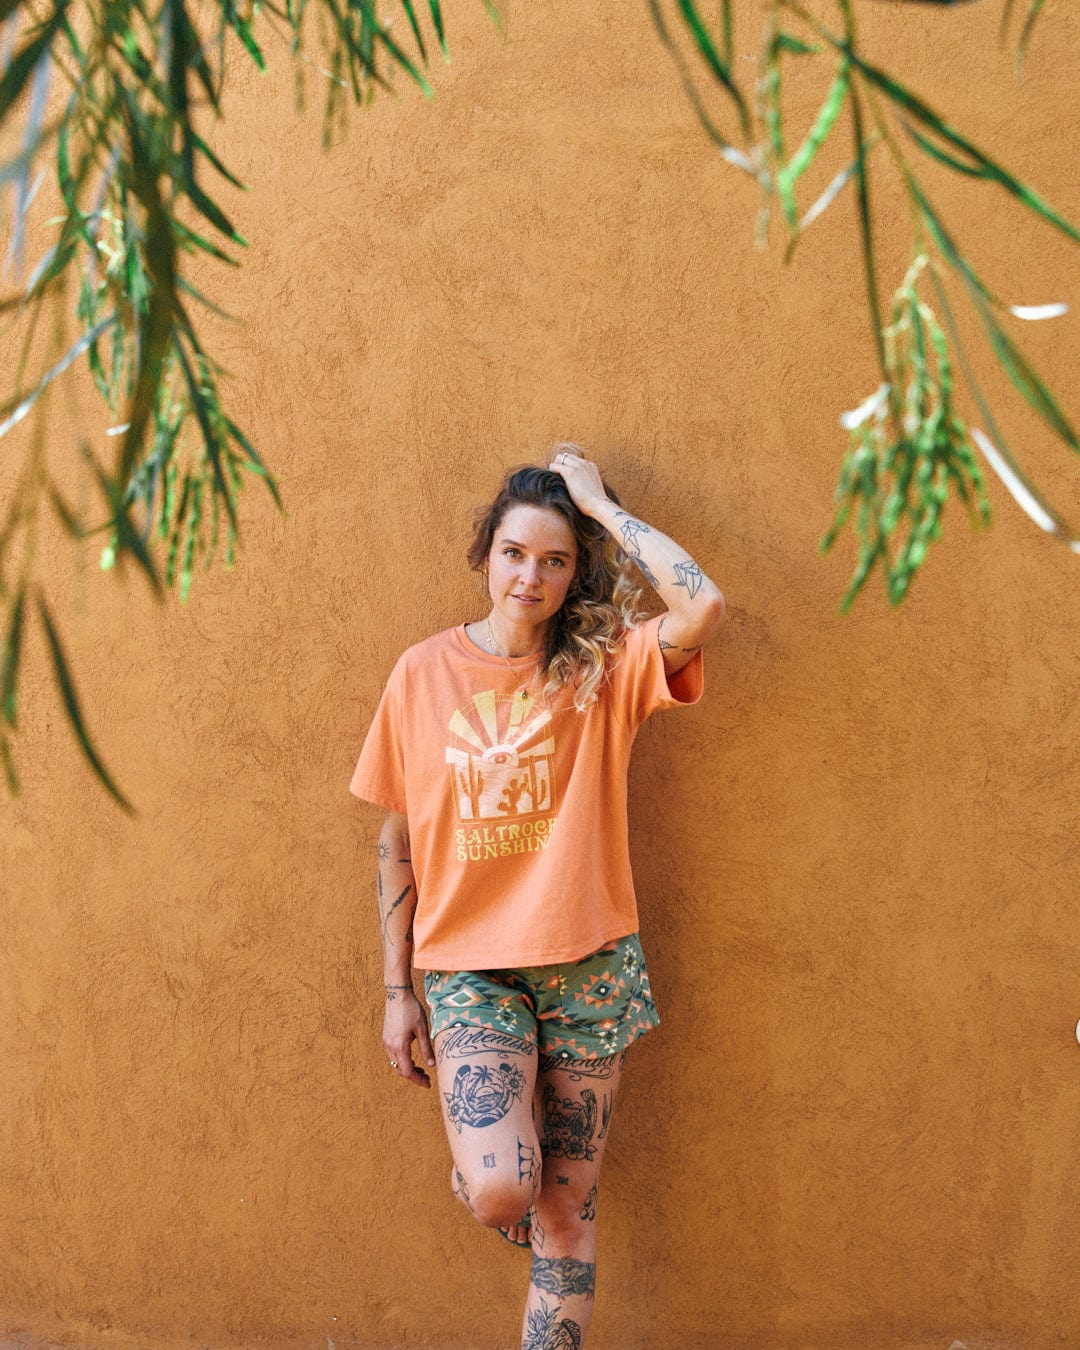 A person with tattoos, wearing an orange Saltrock Sunshine - Recycled Womens Cropped T-Shirt - Orange with Saltrock branding and patterned shorts, stands against an orange wall while touching their hair. Green leaves frame the top of the image.